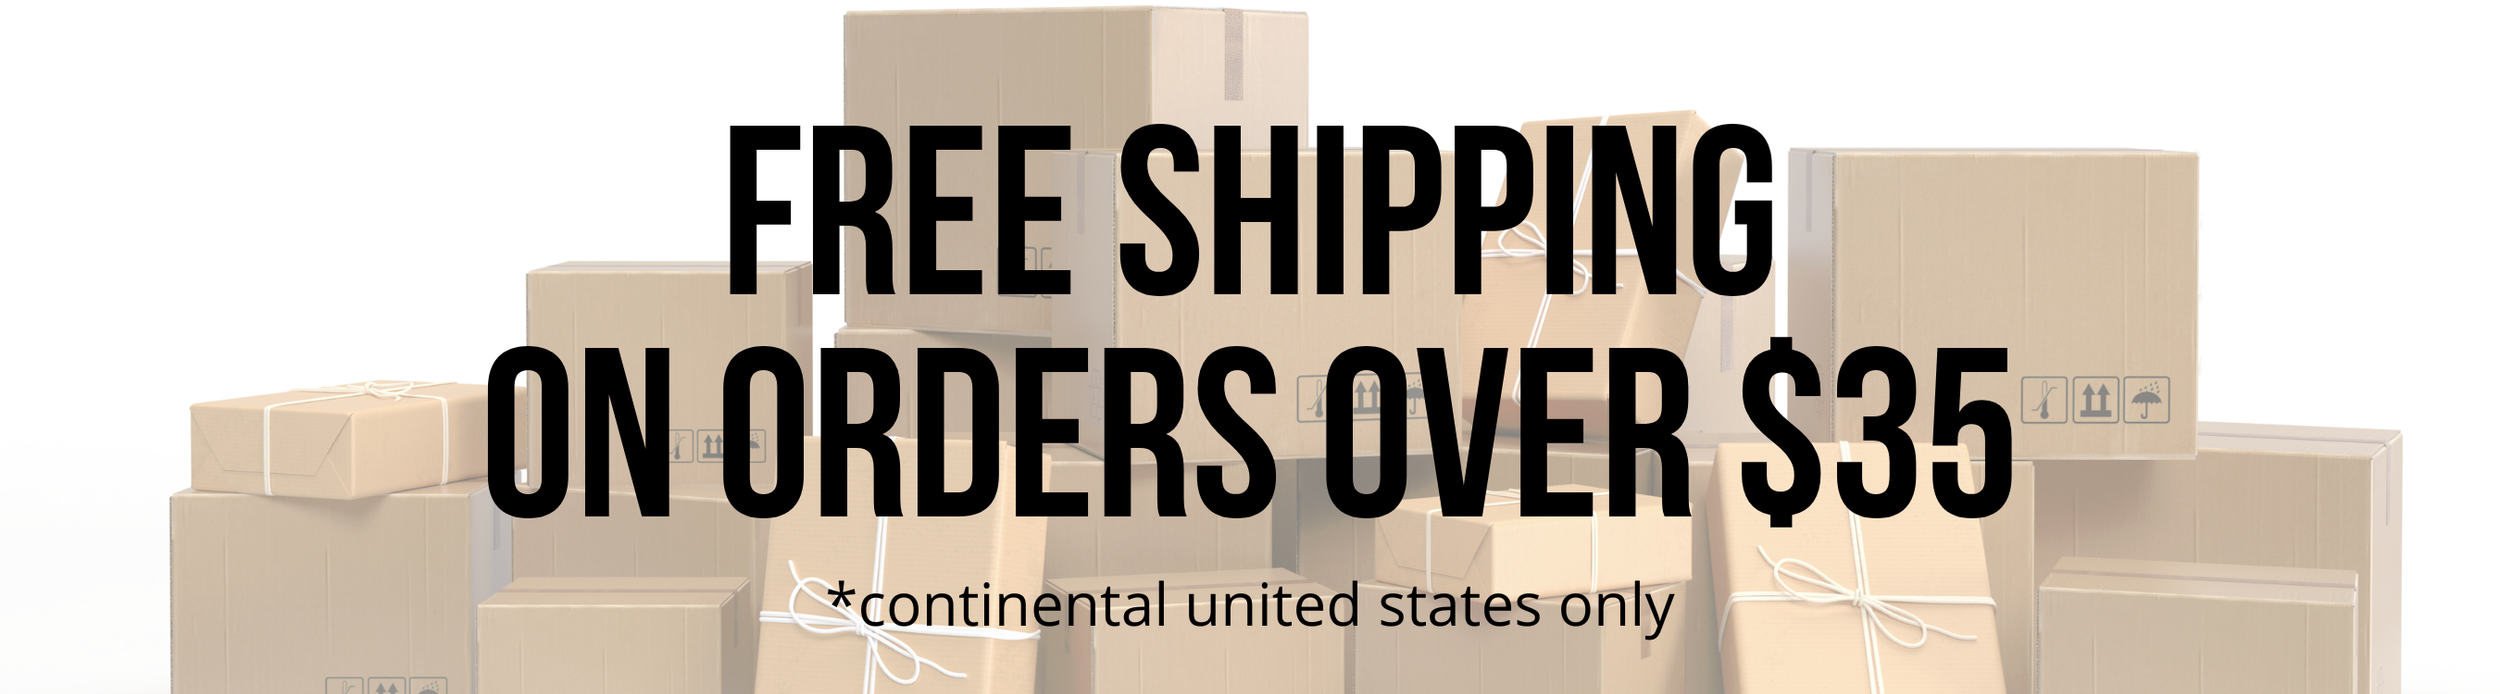 Copy of FREE SHIPPING.png